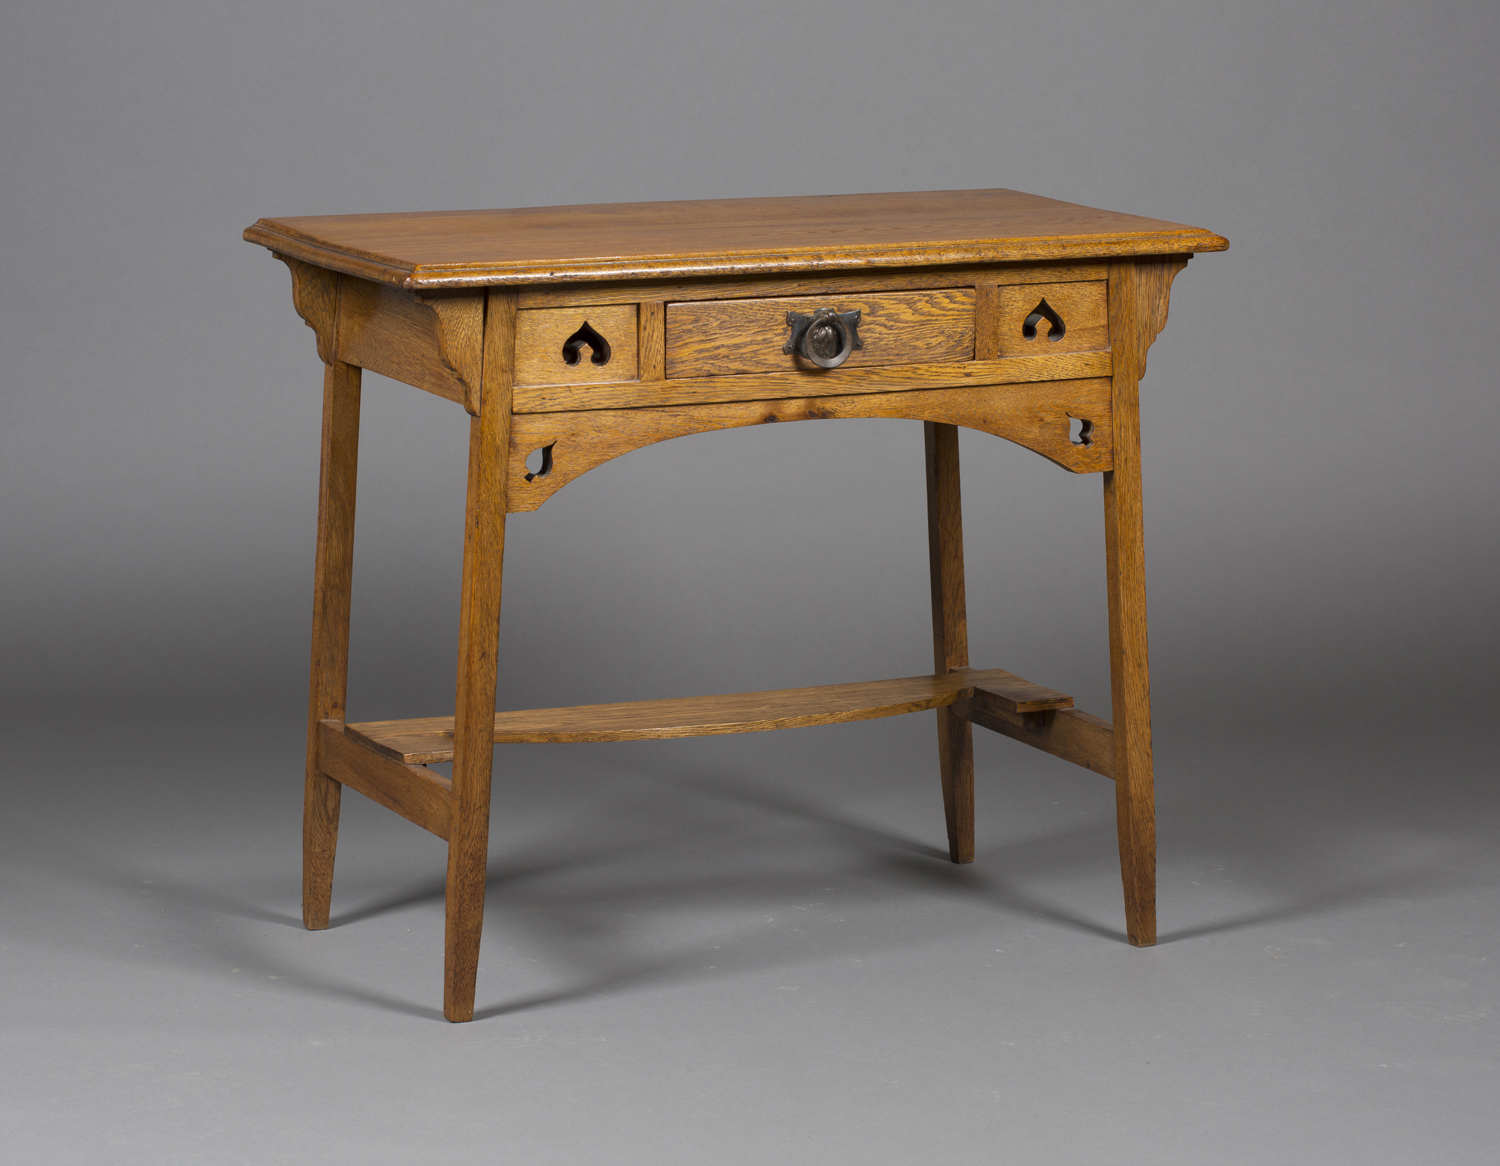 An early 20th century Arts and Crafts oak side table, in the manner of Liberty & Co, the frieze